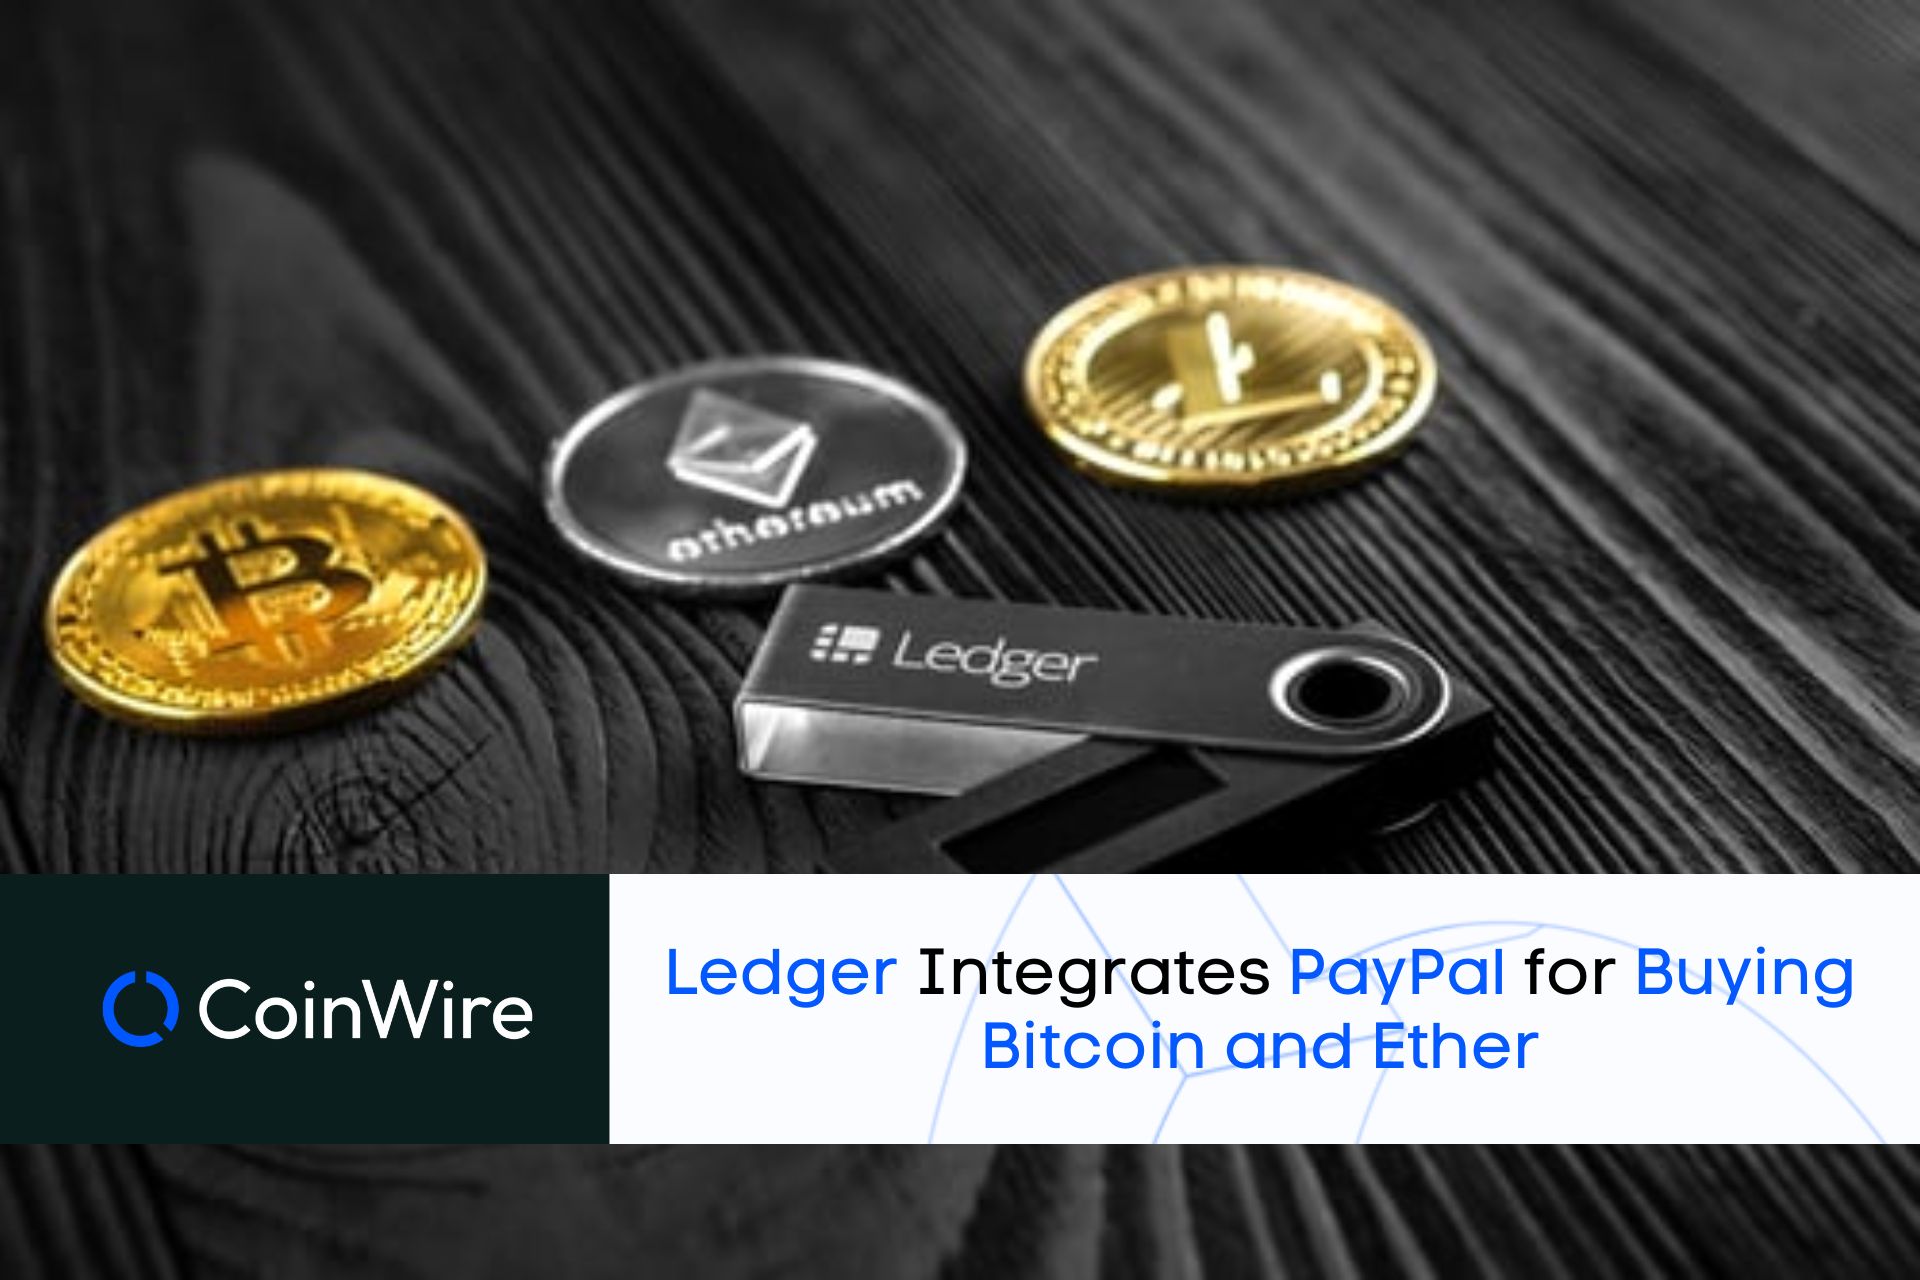 Ledger Integrates Paypal For Buying Bitcoin And Ether